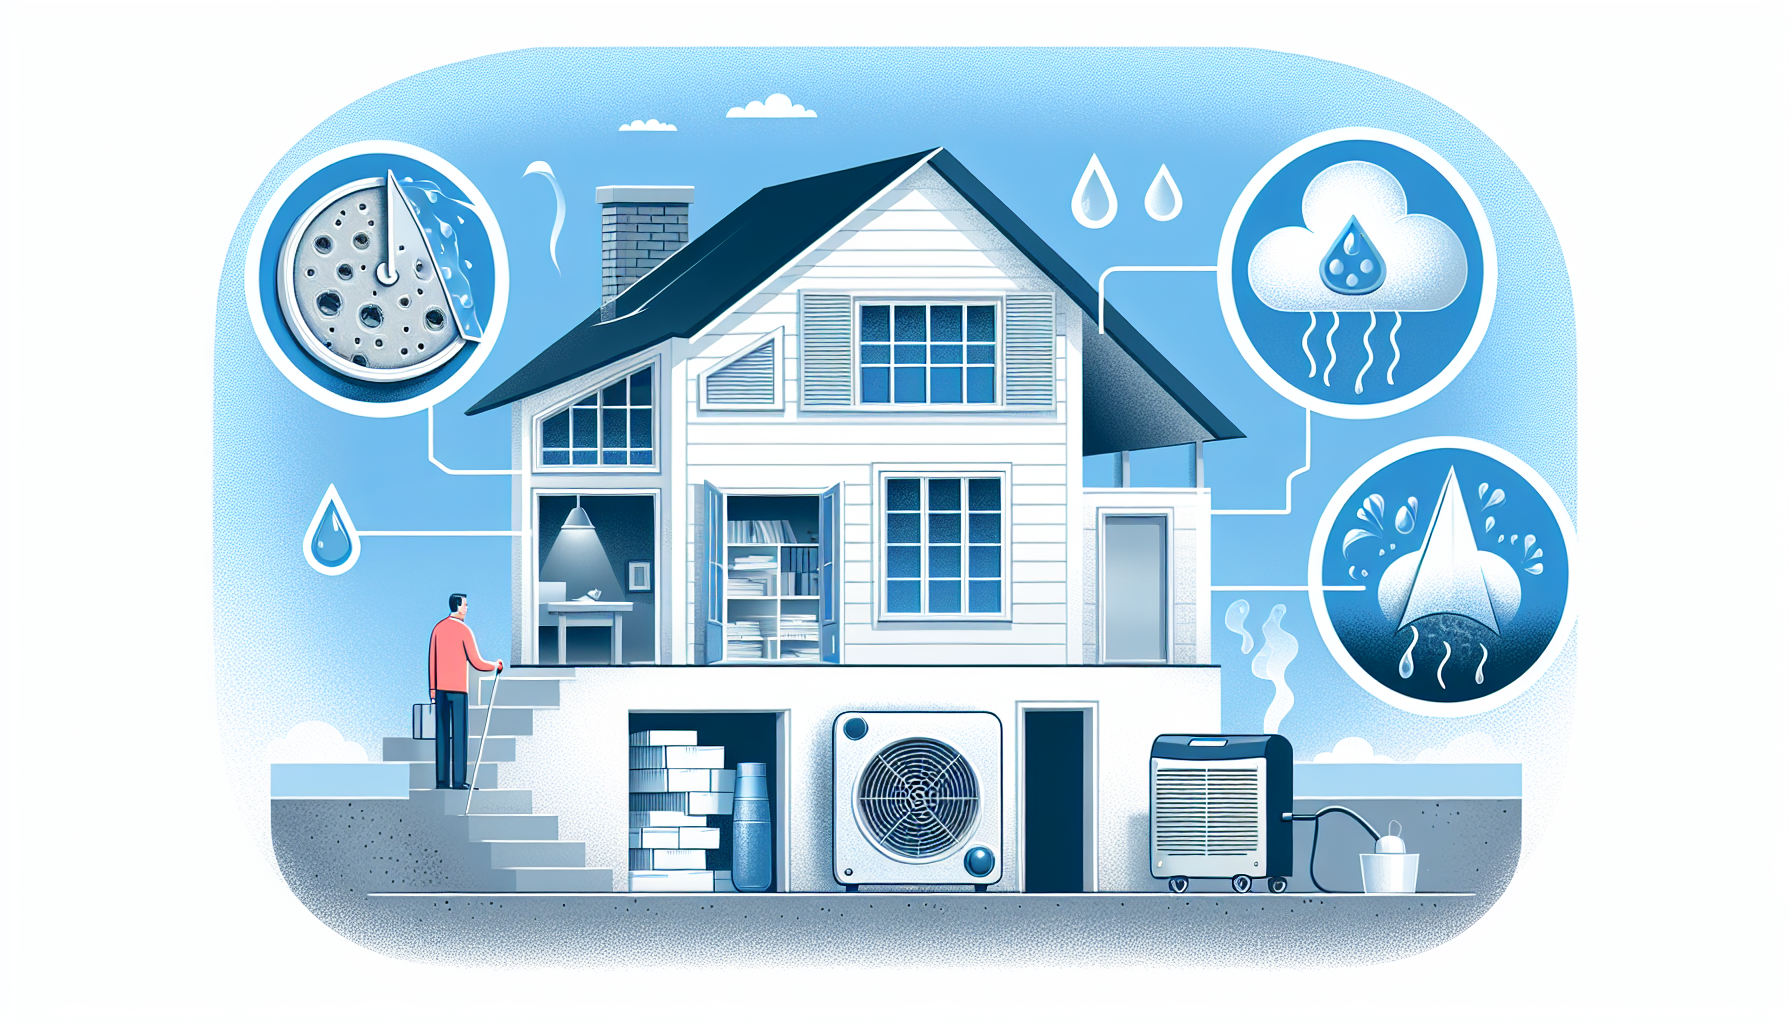 Illustration of preventative practices to keep mold at bay